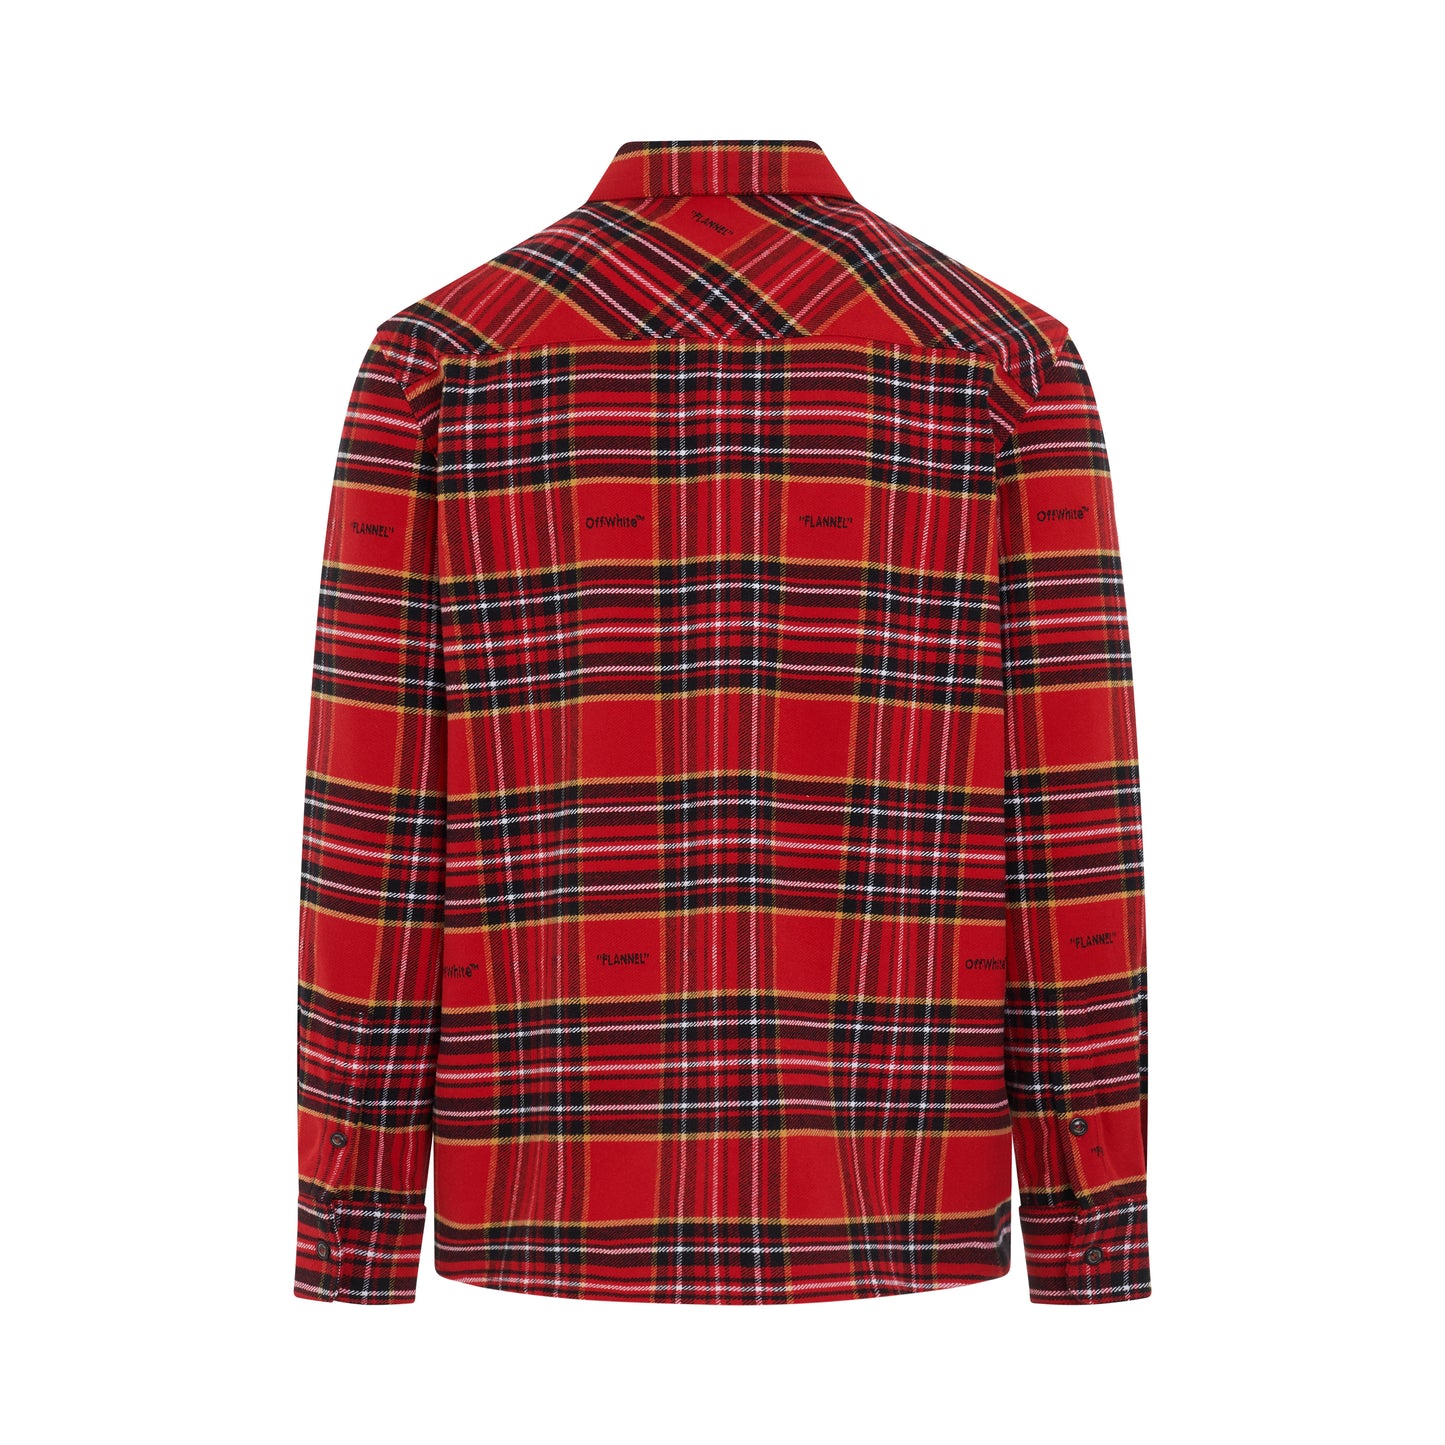 Flannel Skate Fit Shirt in Red/Black